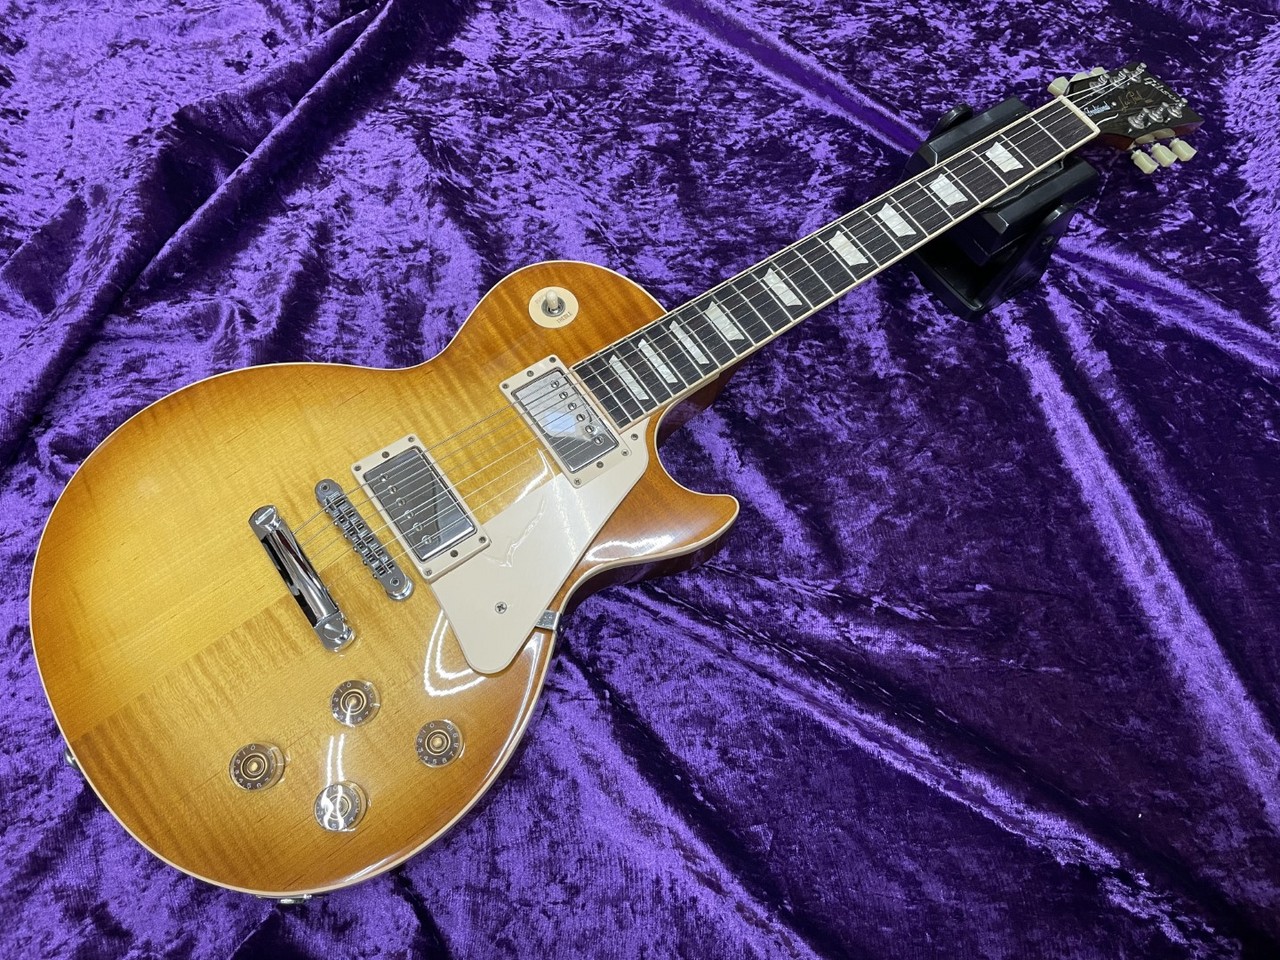 Gibson Les Paul traditional 2016 T